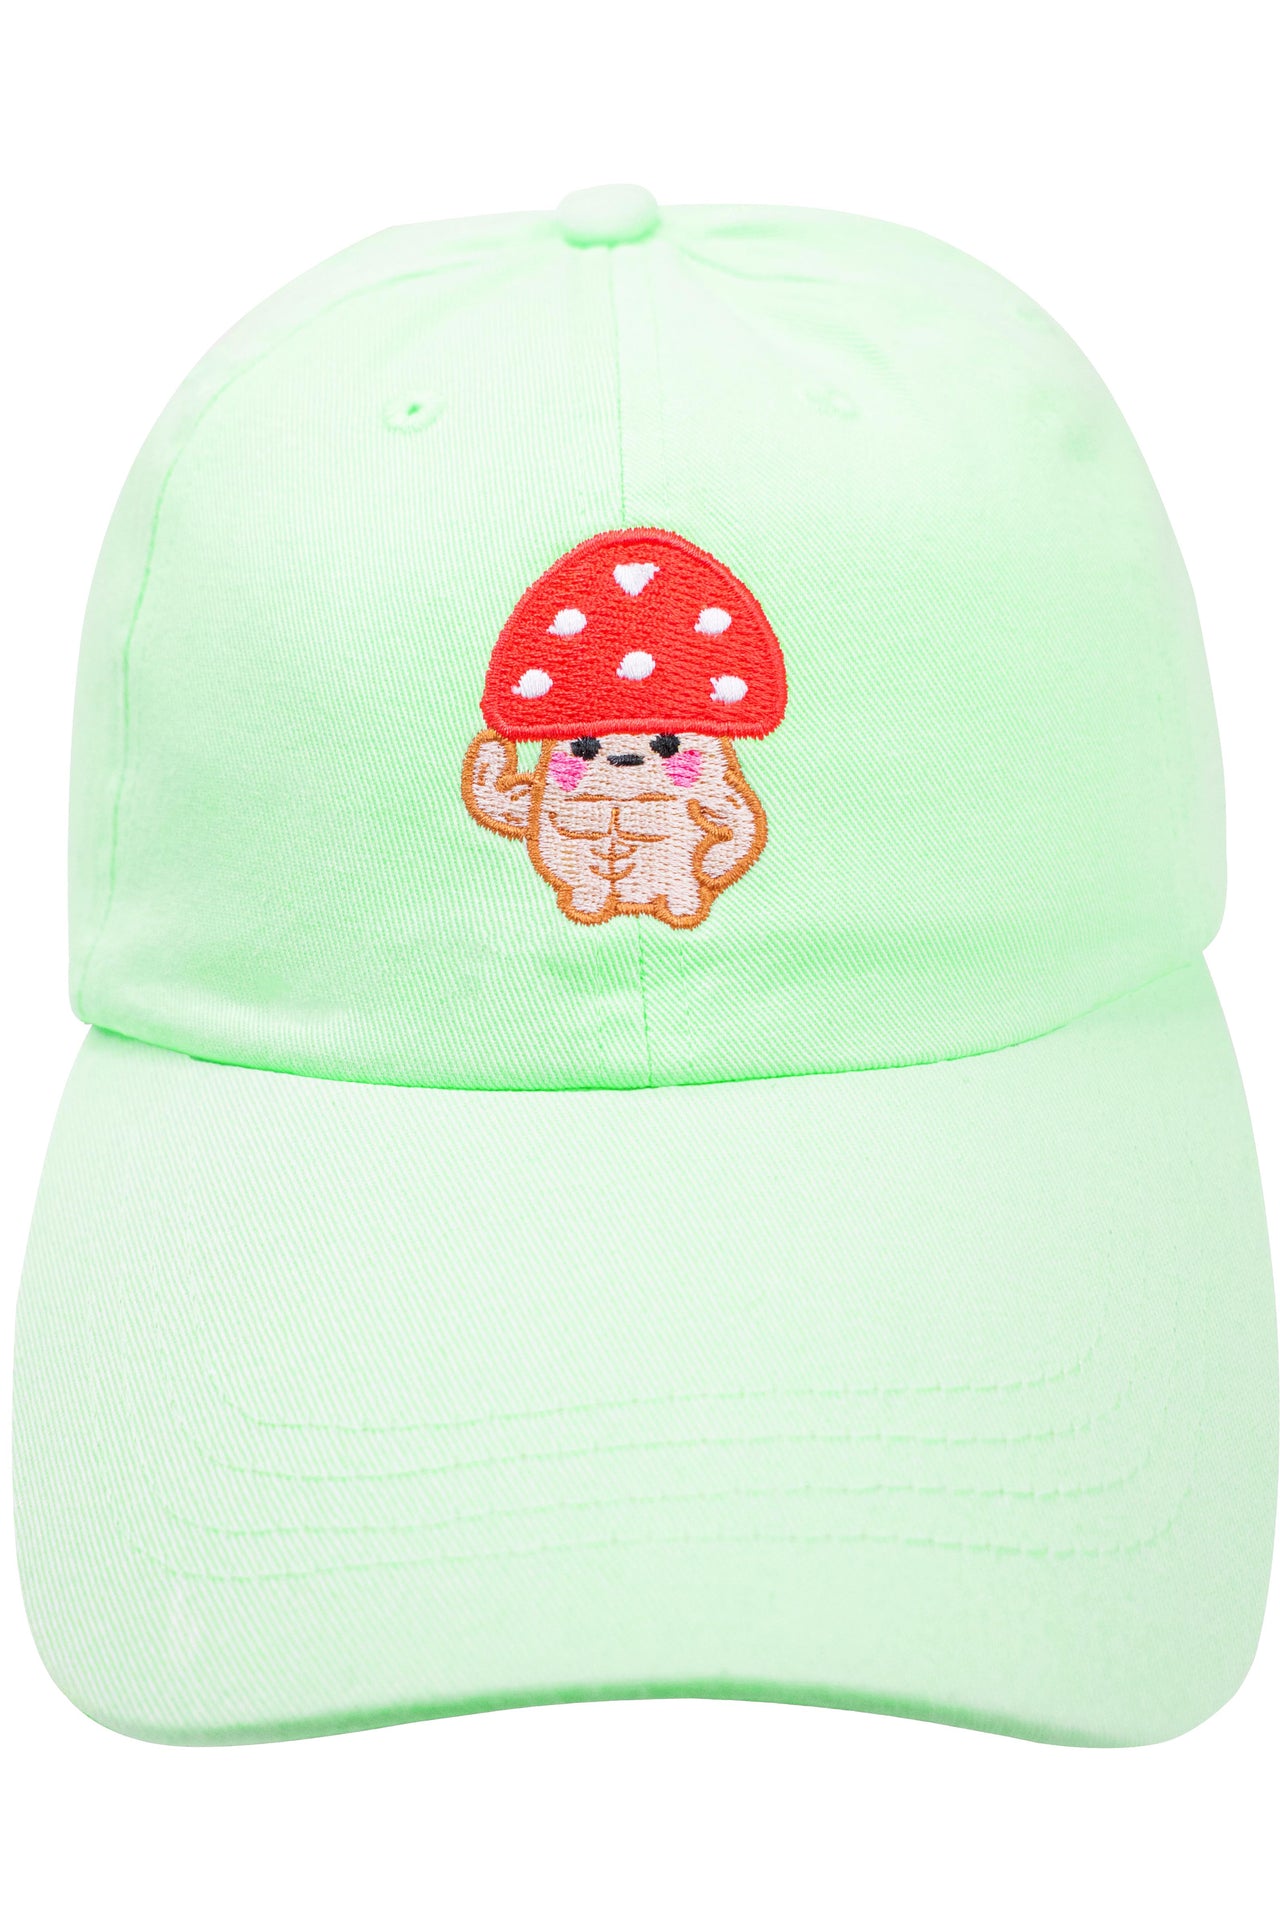 Mighty Mushroom Friend Embroidered Cap